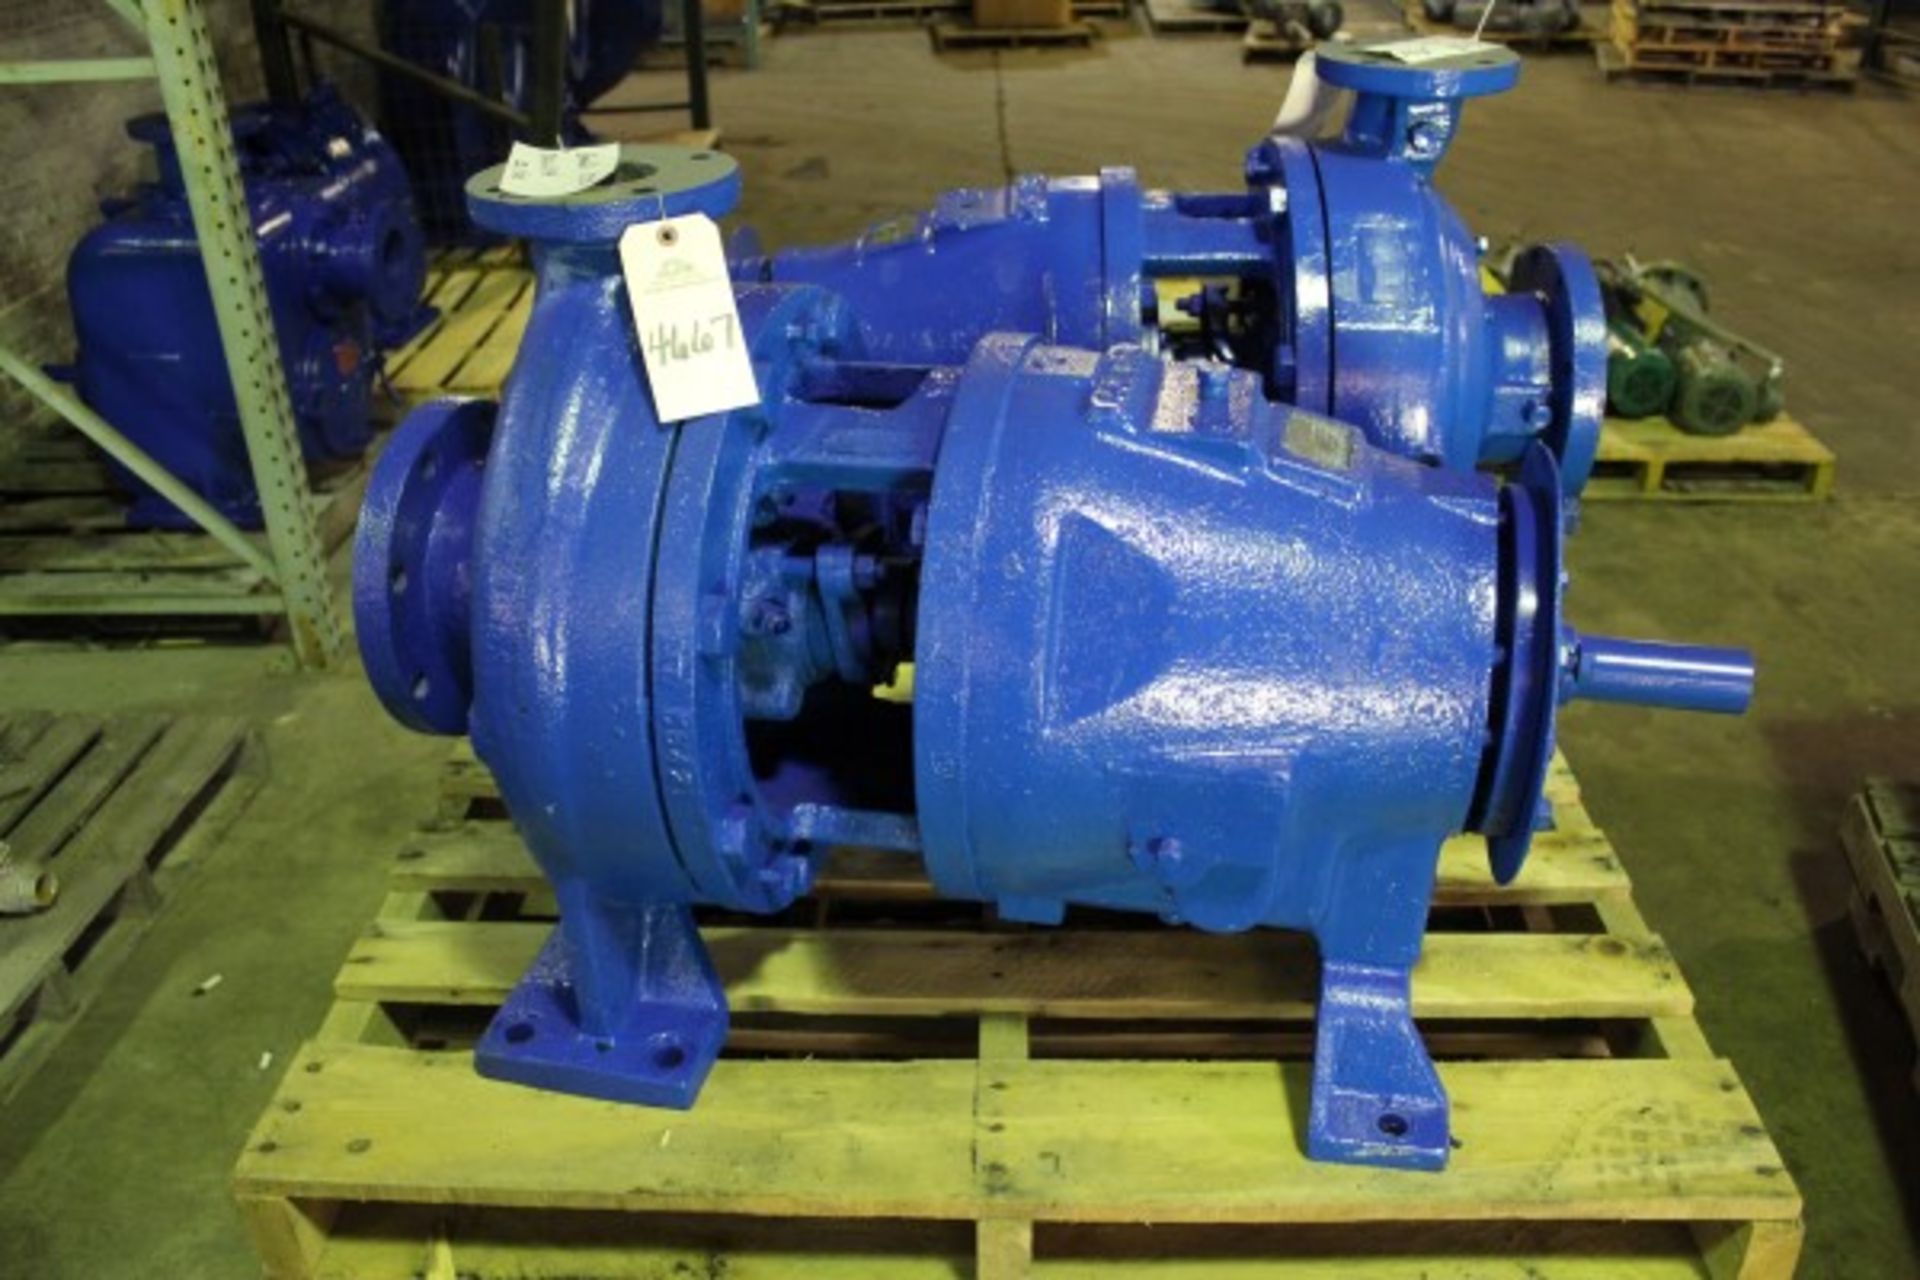 Goulds 3 x 6 x 14, 3175 Pump | Seller to load for $10 per lot or buyers may remove hand carry